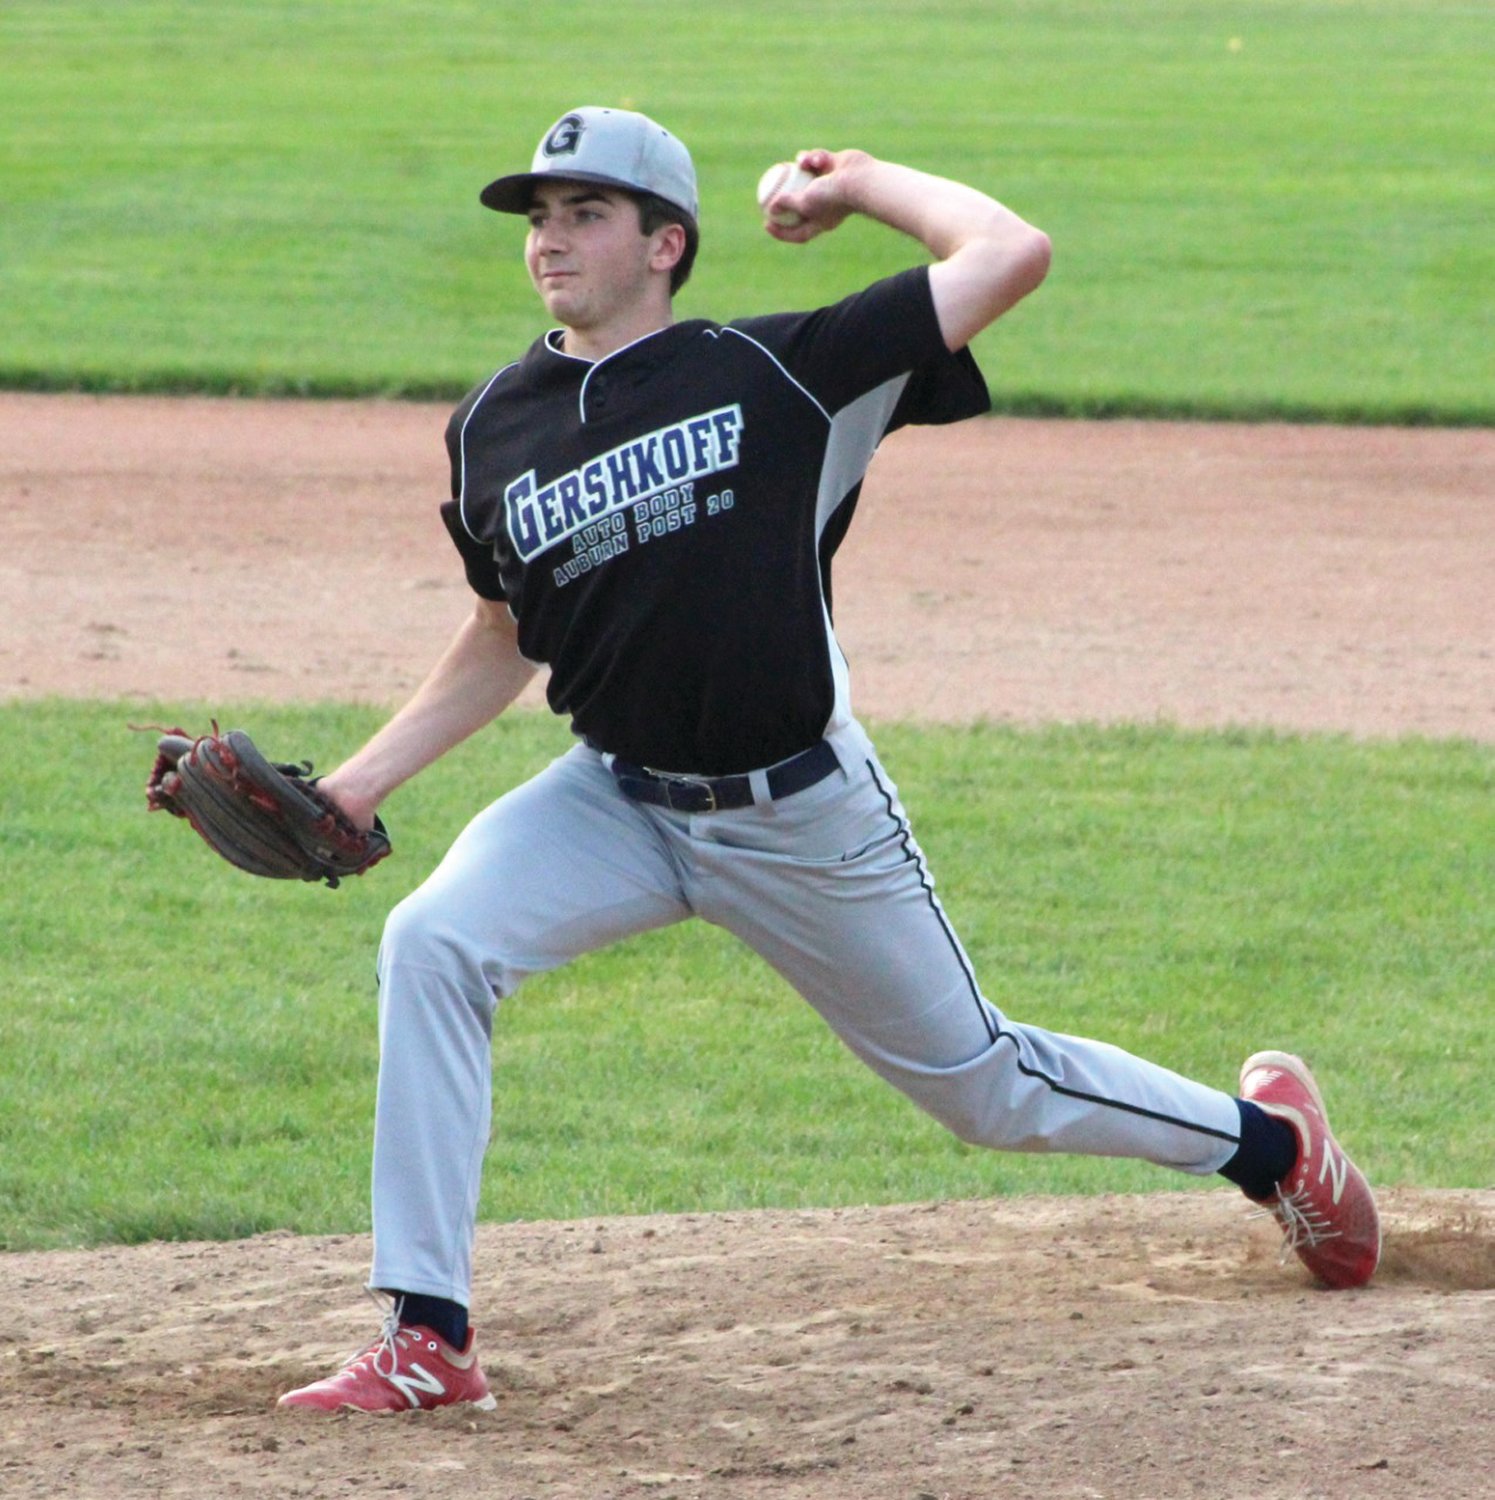 ON THE BUMP: Gershkoff’s Nick Masse delivers a pitch last week. (Photos by Ryan D. Murray)